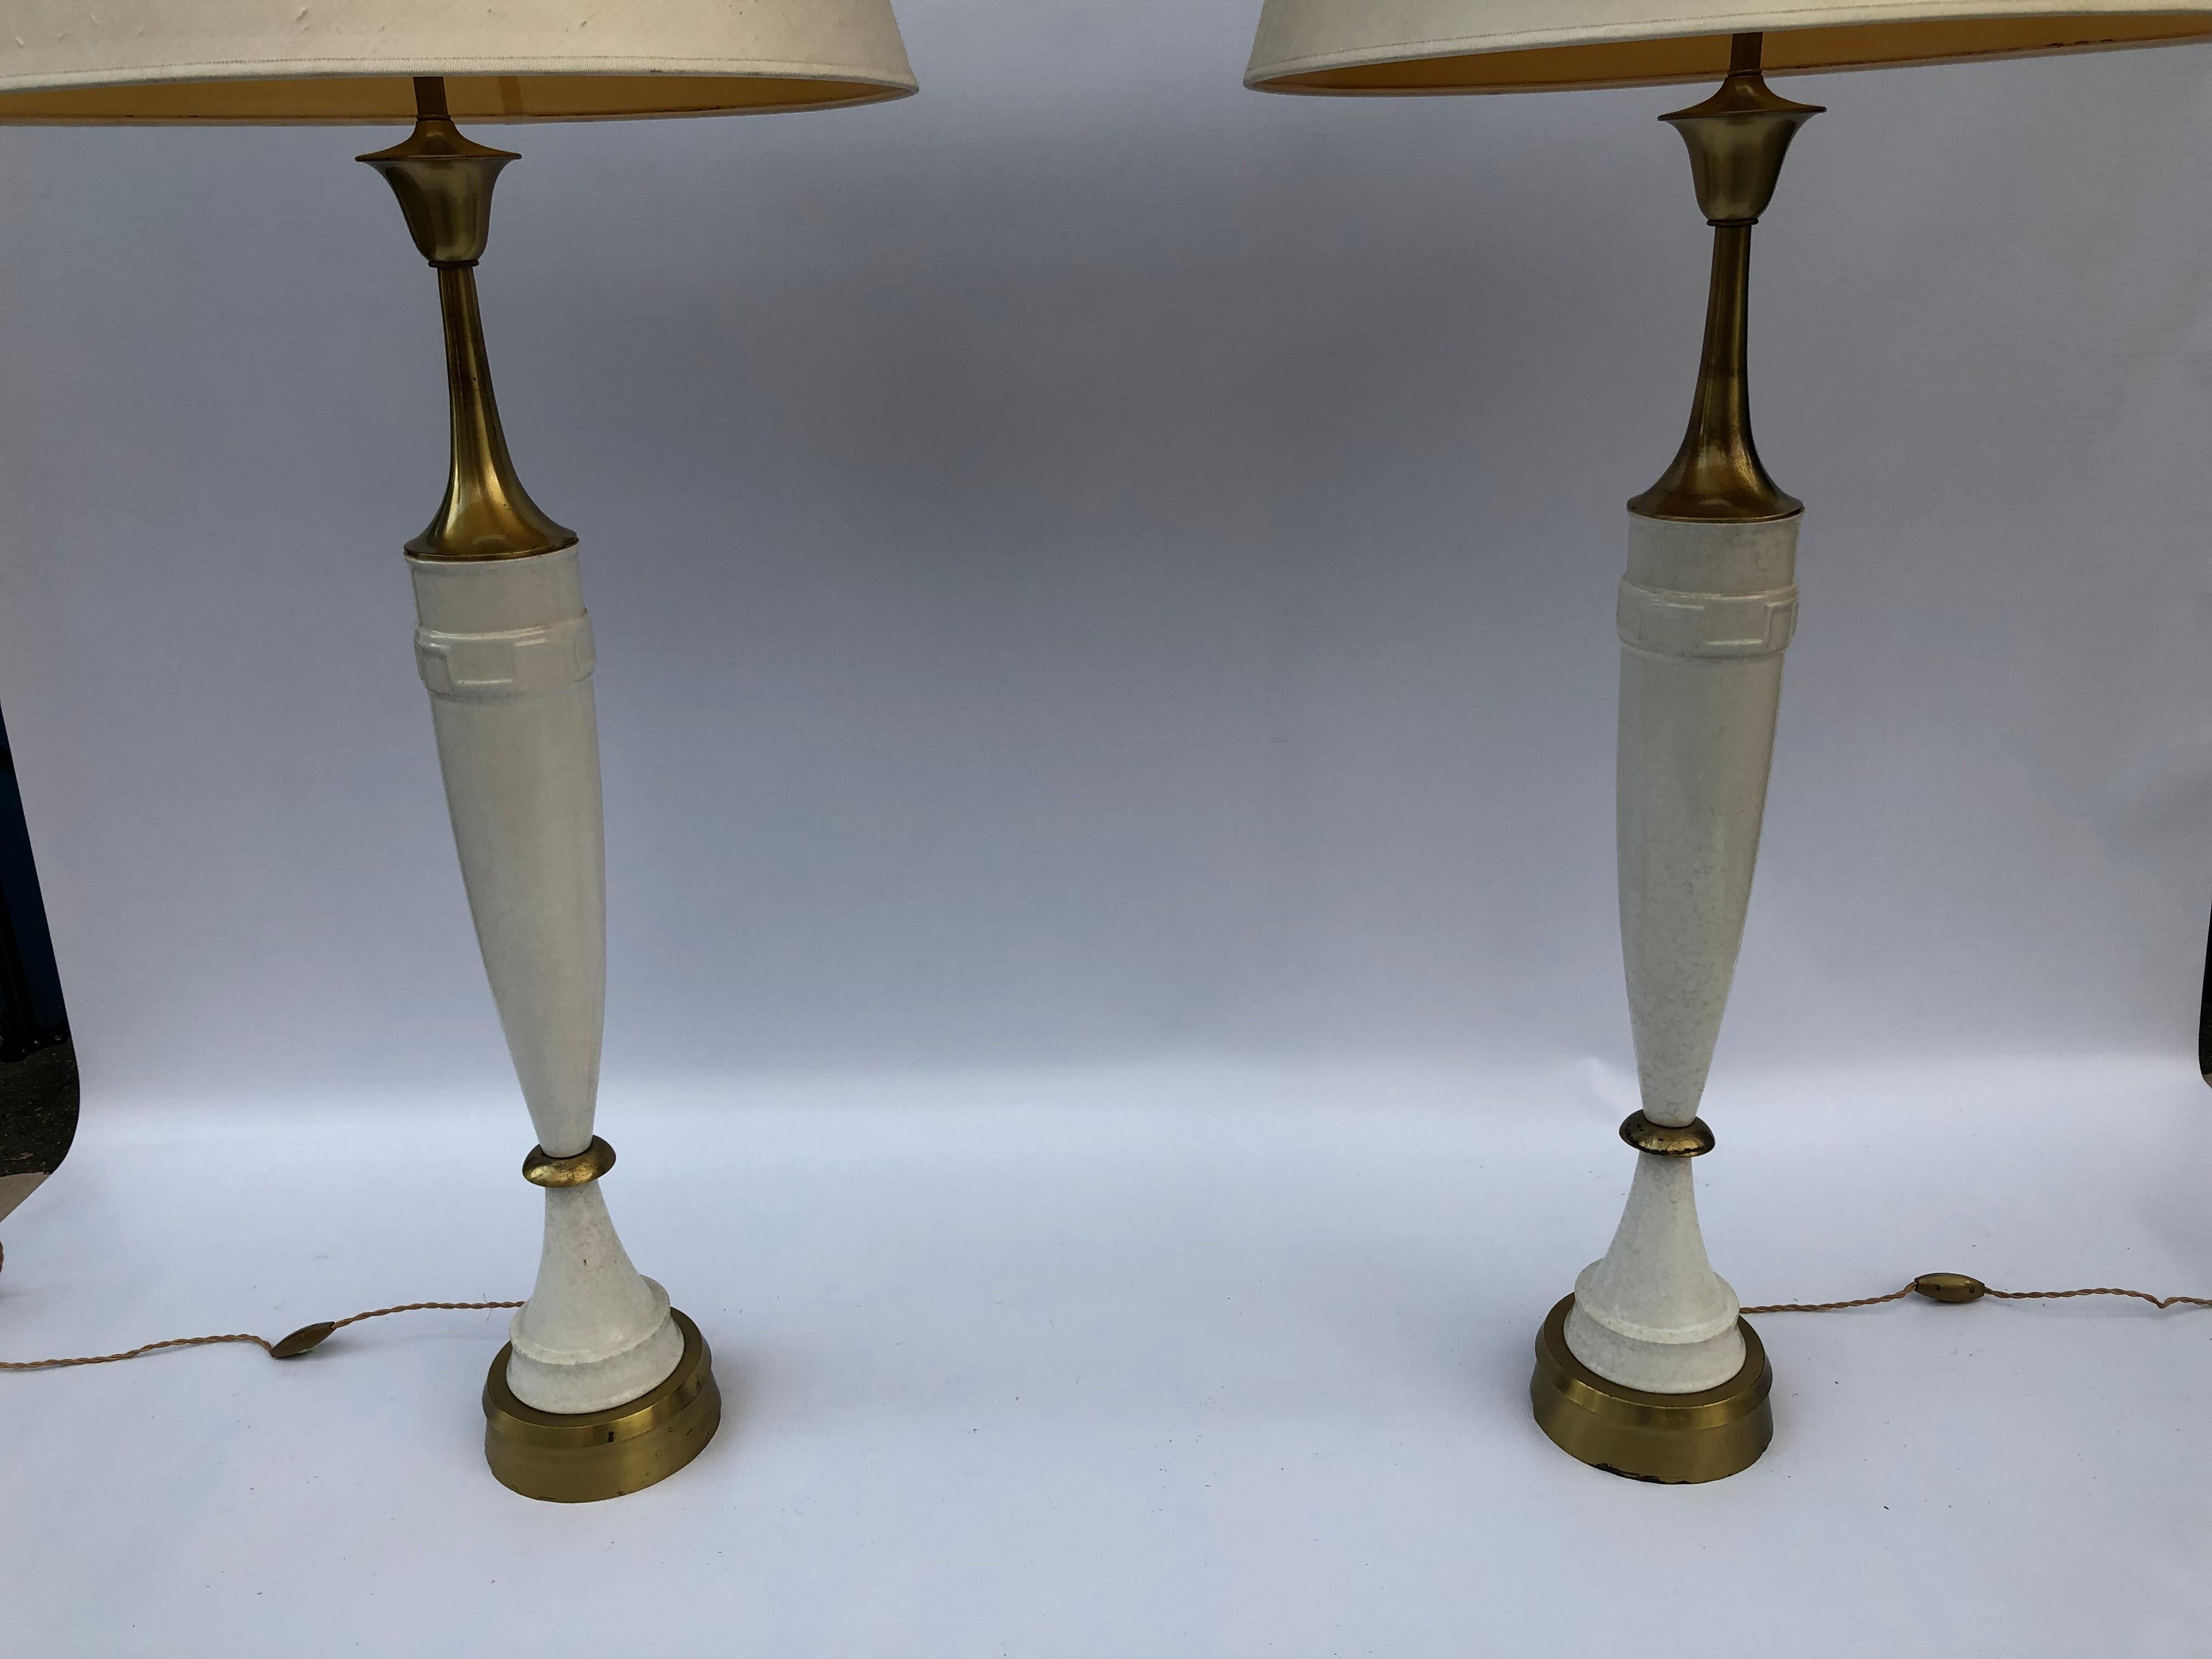 Laurel Greek Key Ceramic Brass Table Lamps 1970s Hollywood Regency Neoclassical In Good Condition For Sale In London, GB